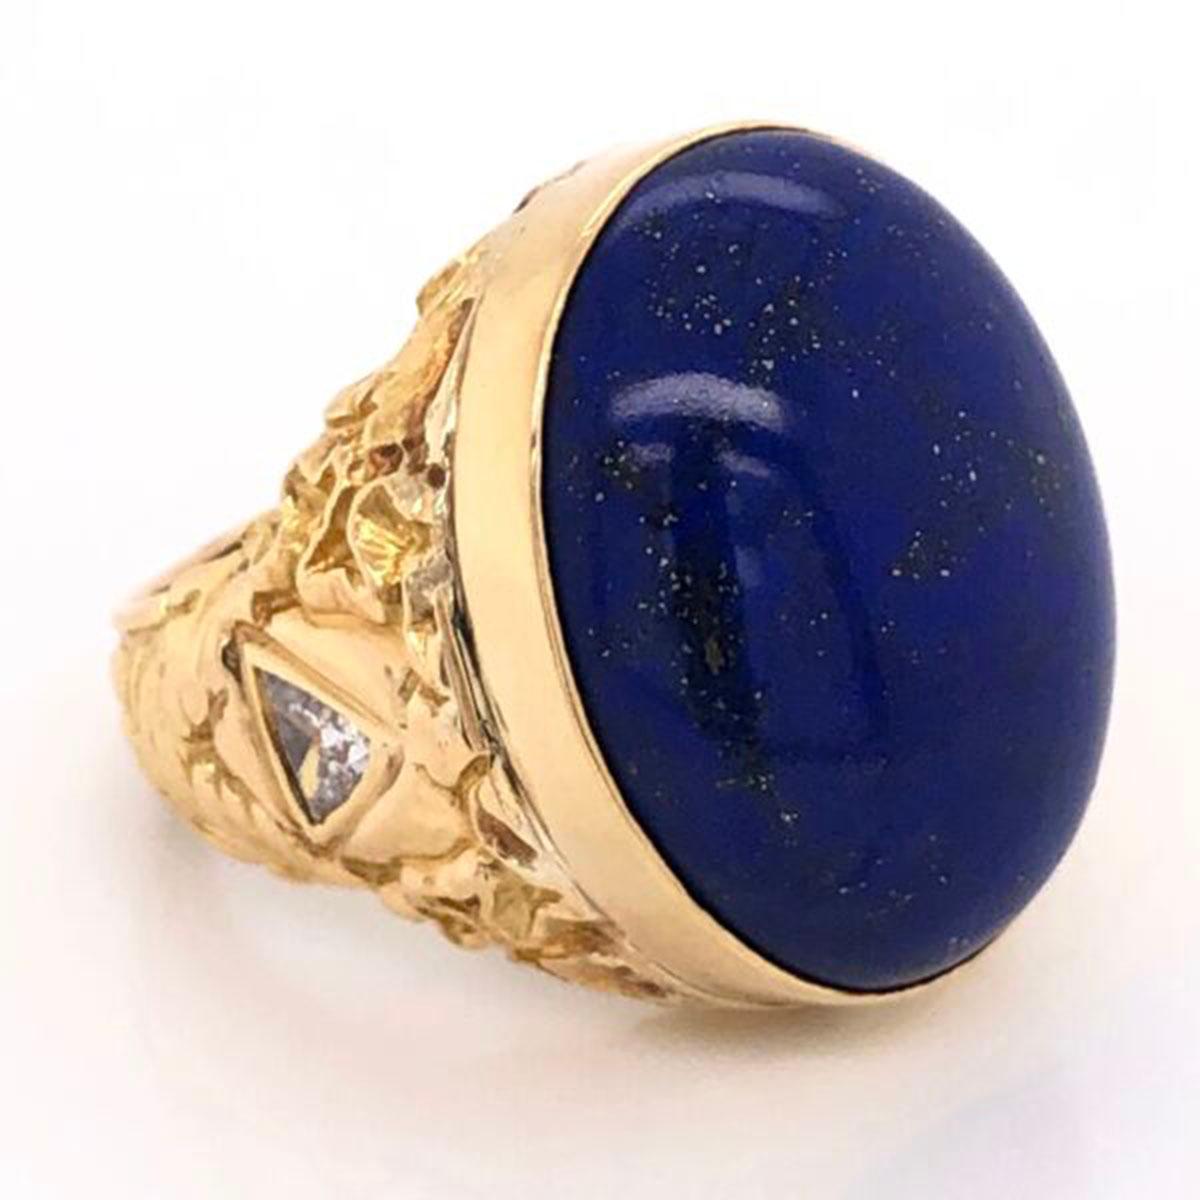 Magnificent Lapis Lazuli Ring, centering a large oval cabochon 20 Carat cabochon-cut Lapis Lazuli, bright blue with fabulous tones and small gold flecks, accented with 2 Trillion Diamonds with an approx. total weight of 1.00 Carats. This magical